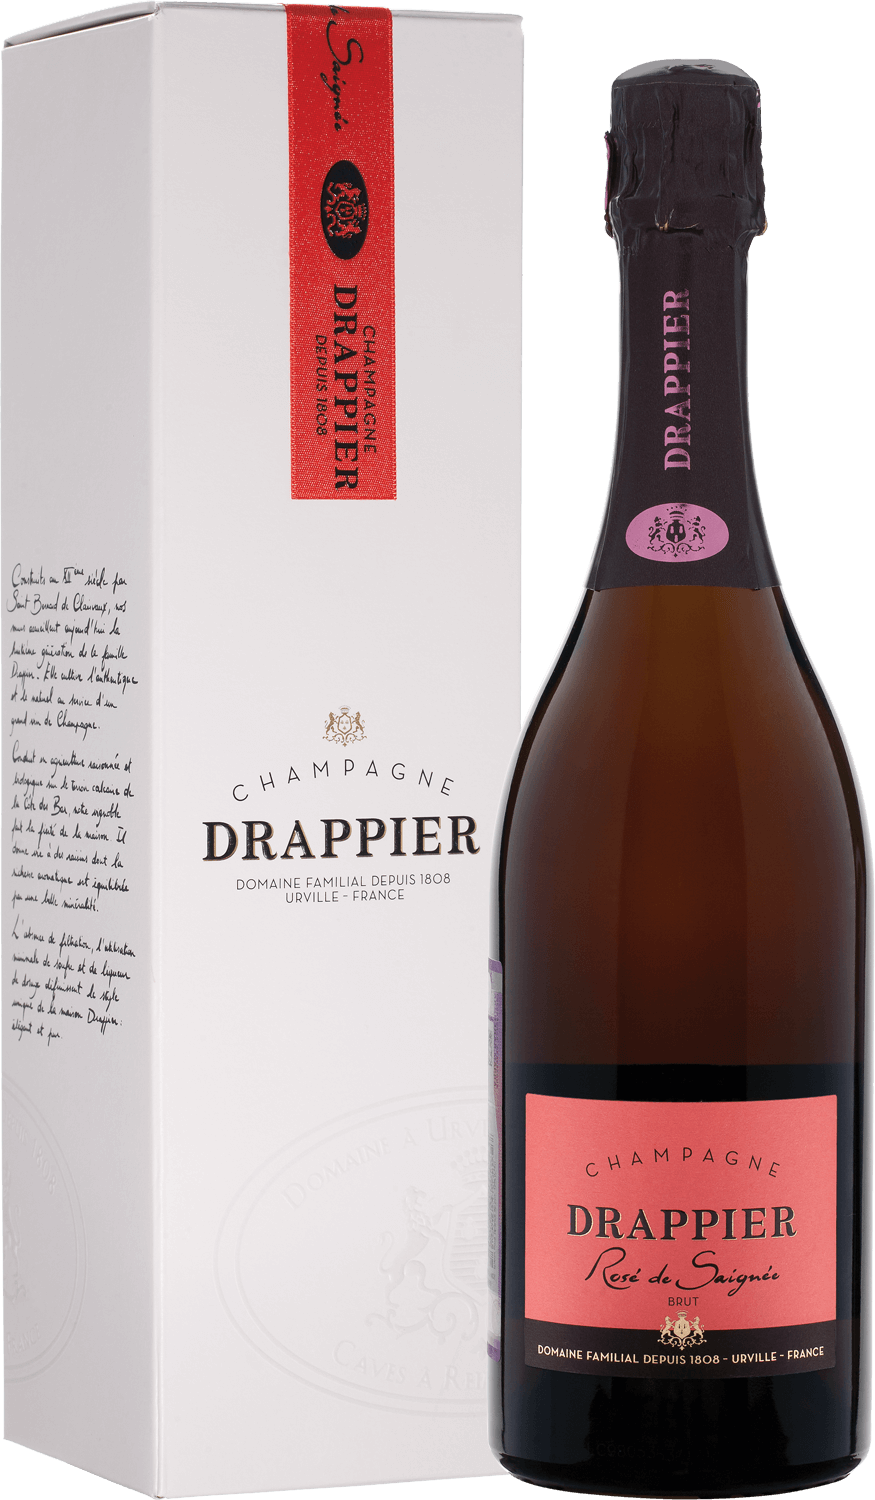 Drappier Brut Rose Champagne AOP in gift box drappier grande sendrée brut champagne aop